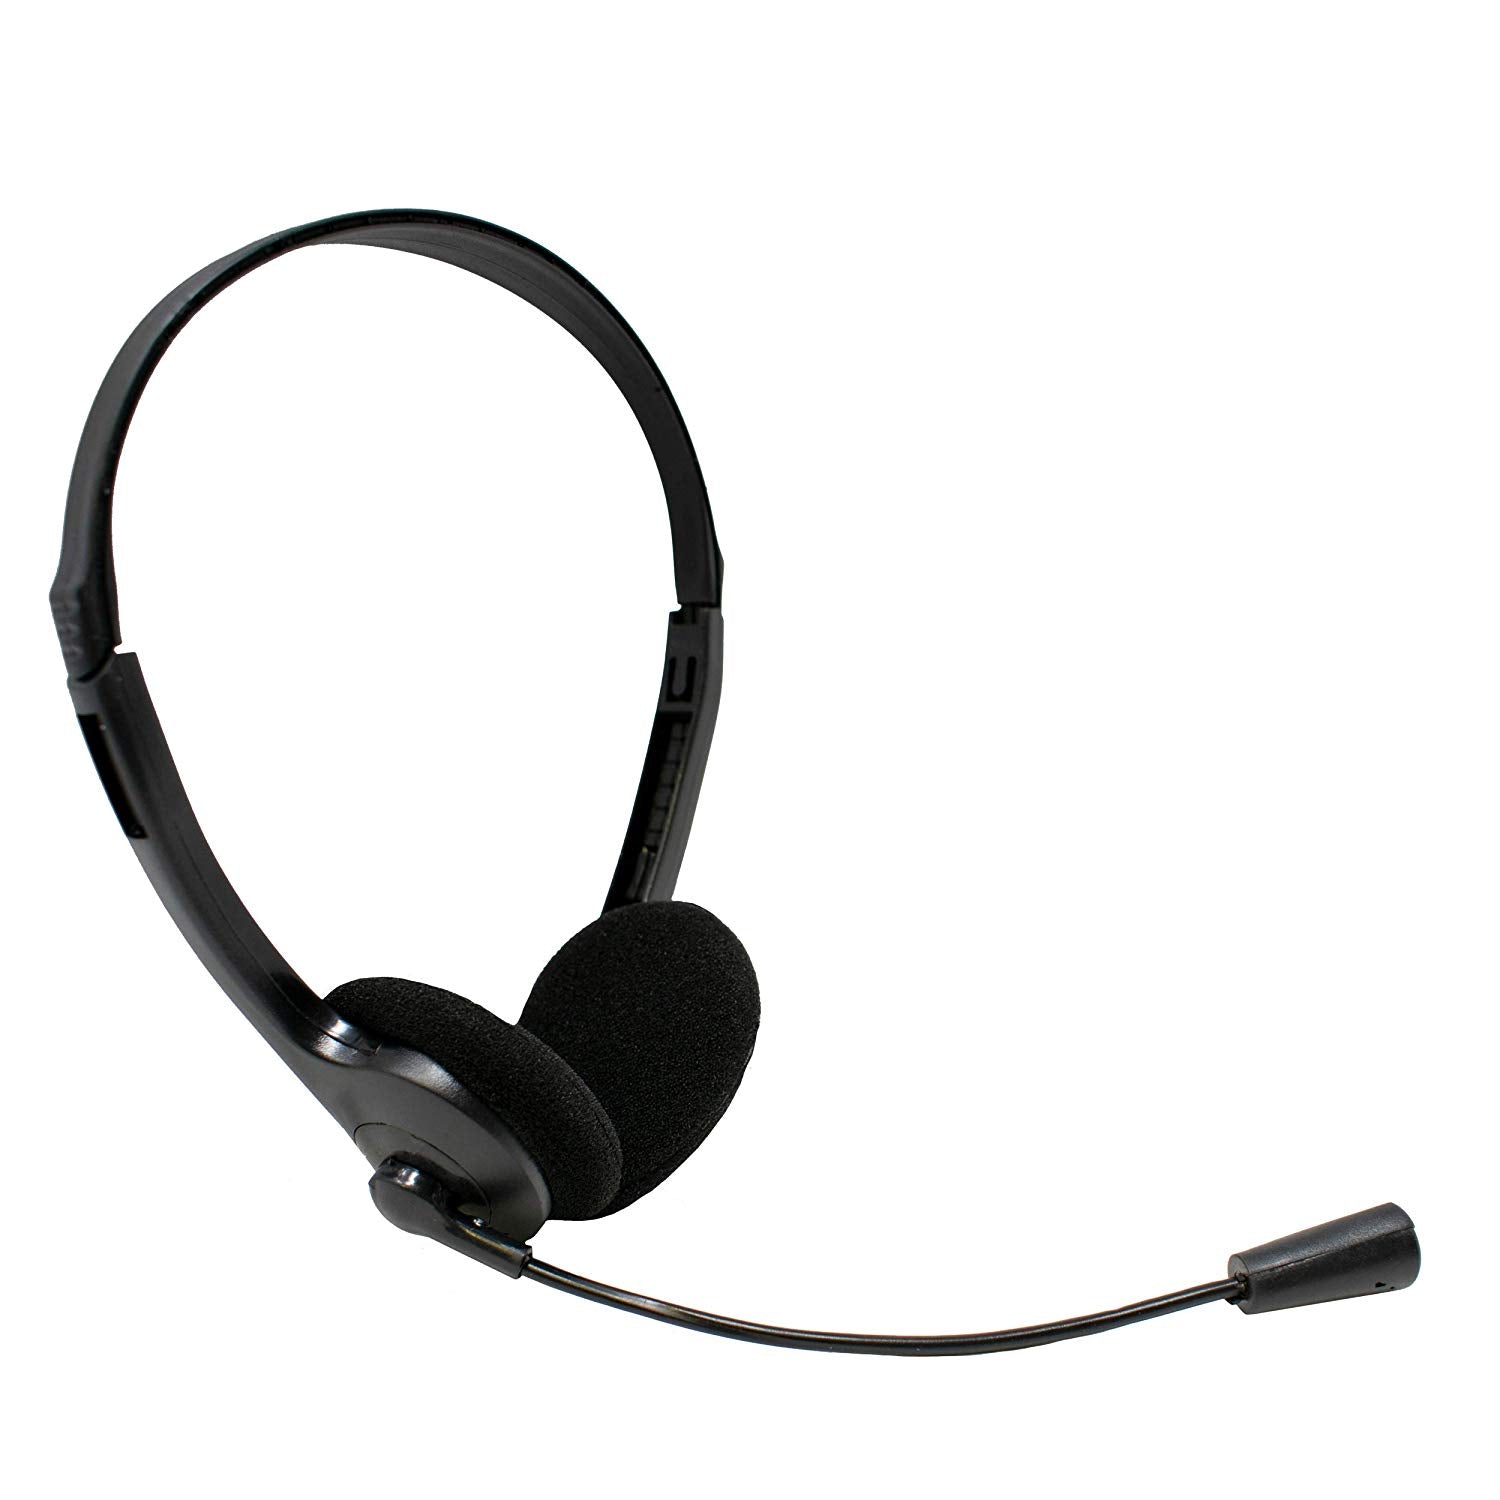 Stereo Headset & Microphone - 3.5mm Jack/s